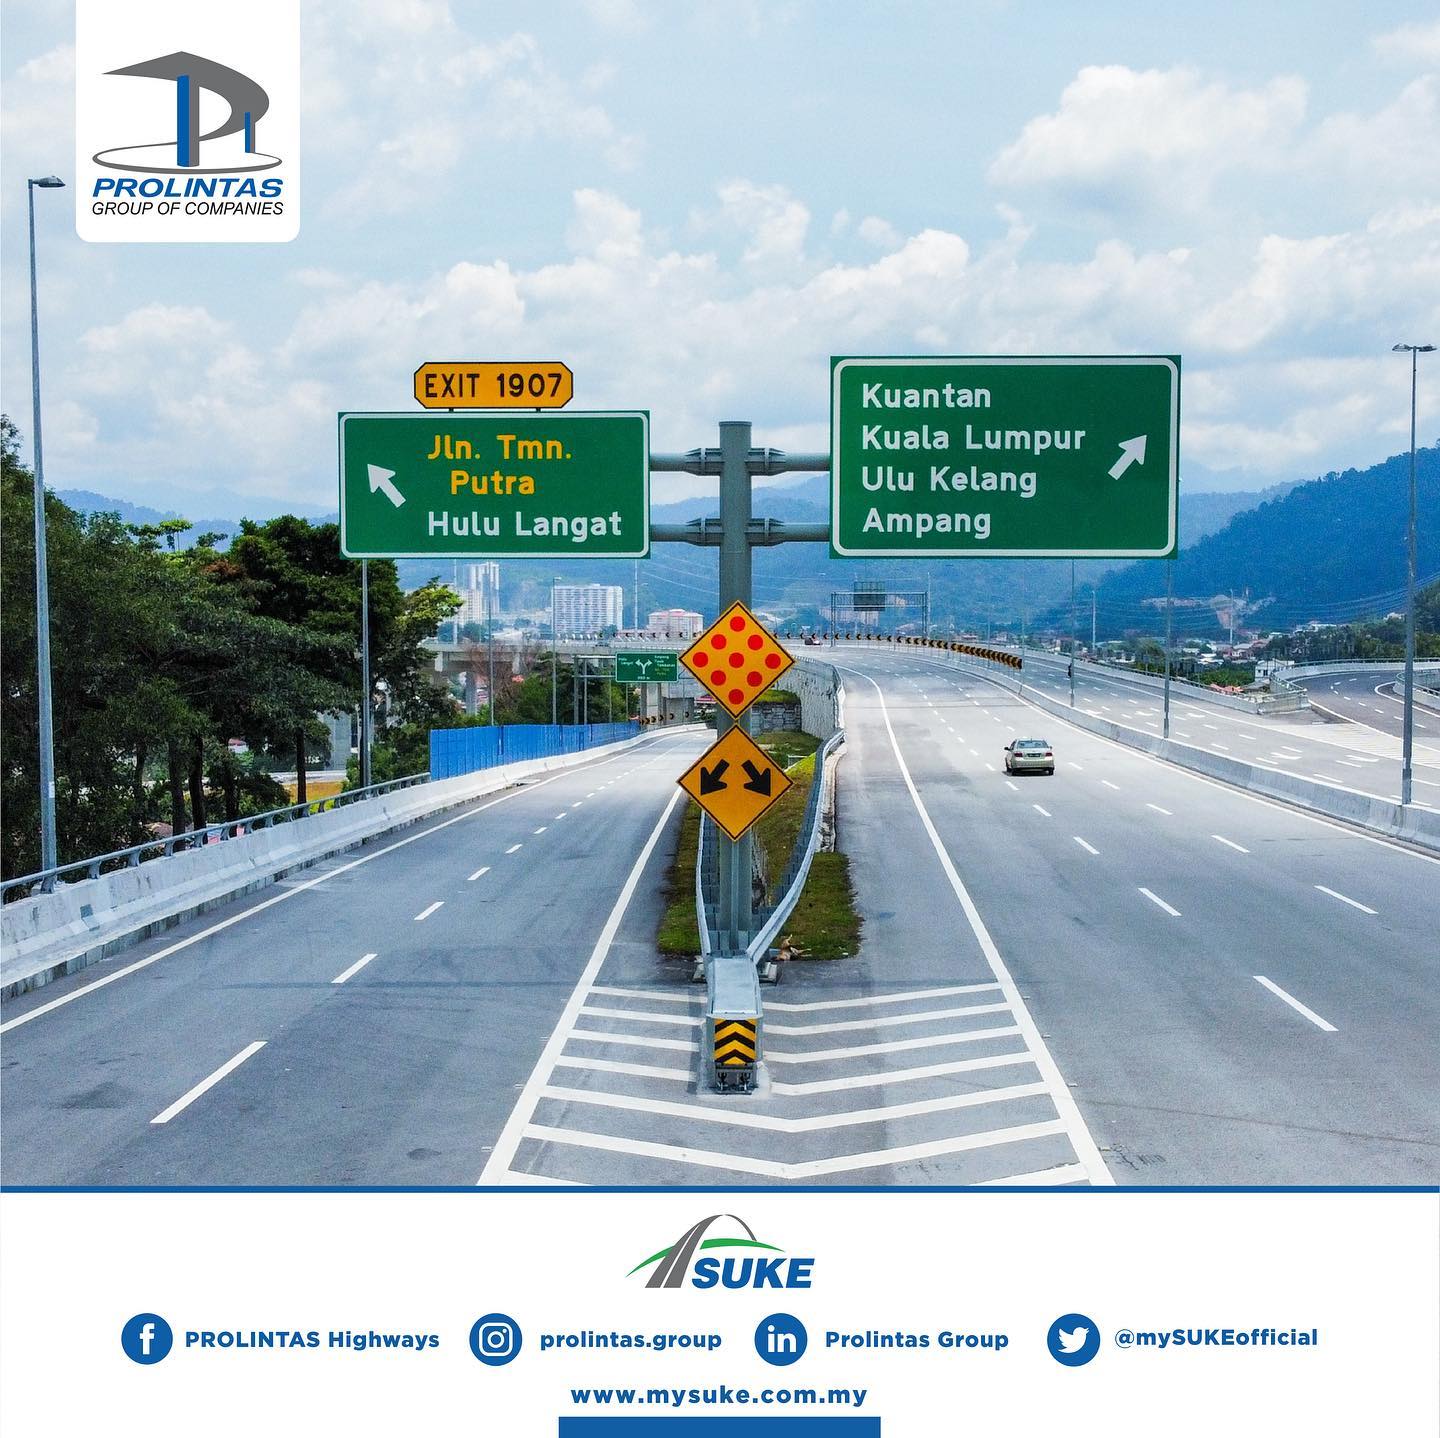 PROLINTAS adds that the mini sign was only meant to serve as a supplementary signage, as other larger overhead signs pointing in the same direction have been installed. Image credit: PROLINTAS Highways